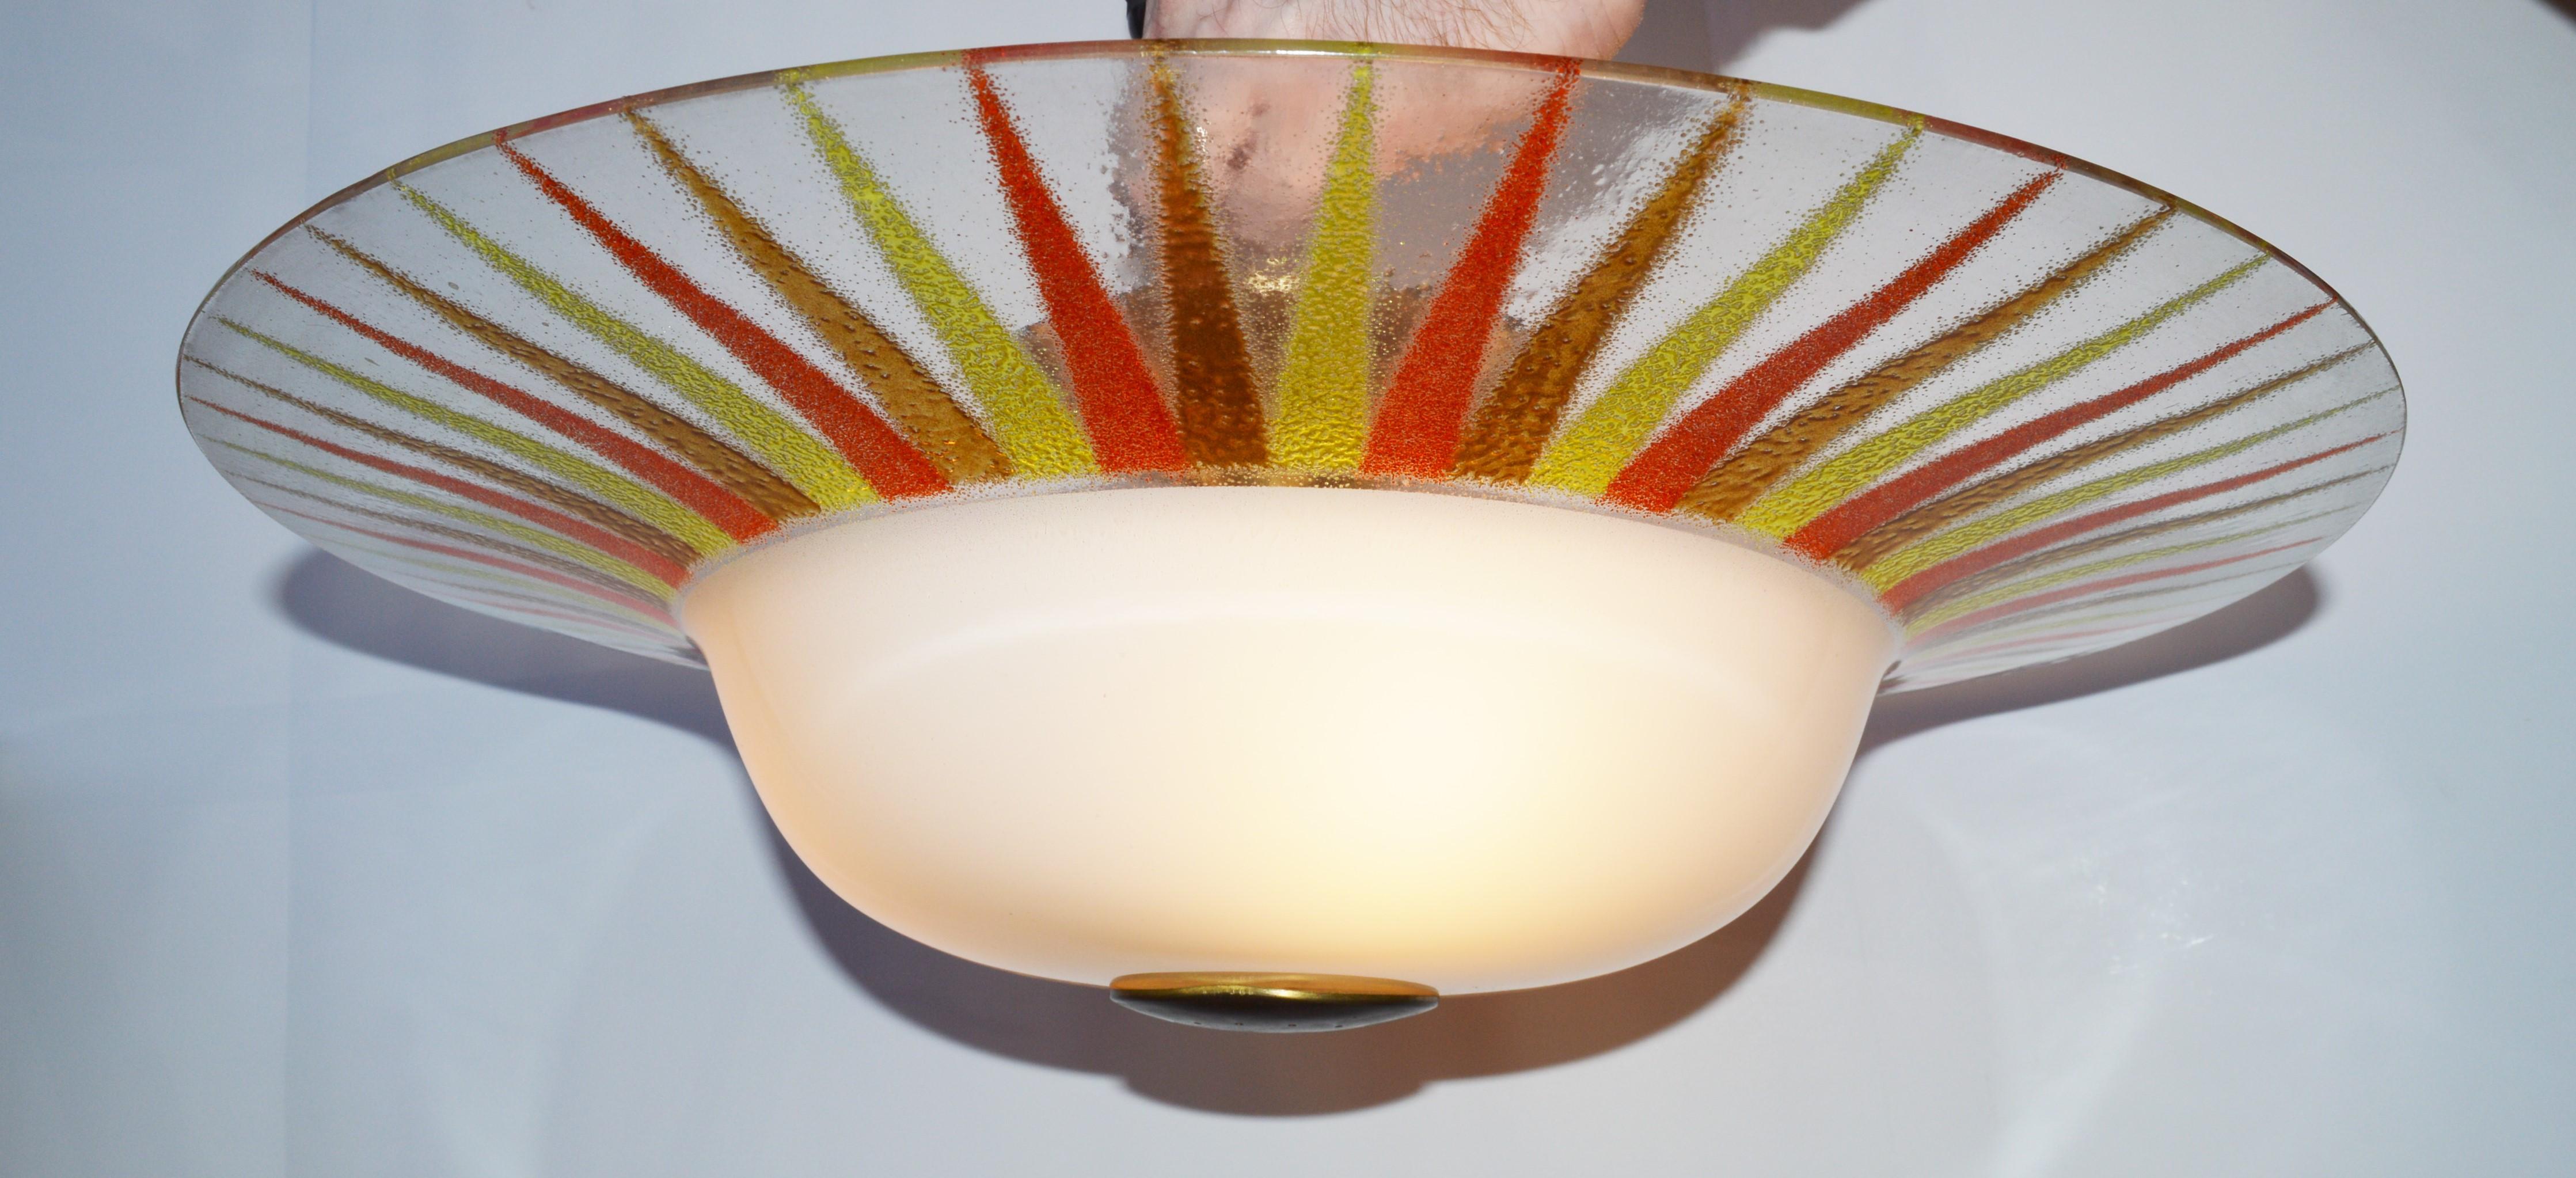 Rare 1950s Gerald Thurston for Lightolier Glass and Brass Sunburst Ceiling Light In Good Condition For Sale In New Westminster, British Columbia